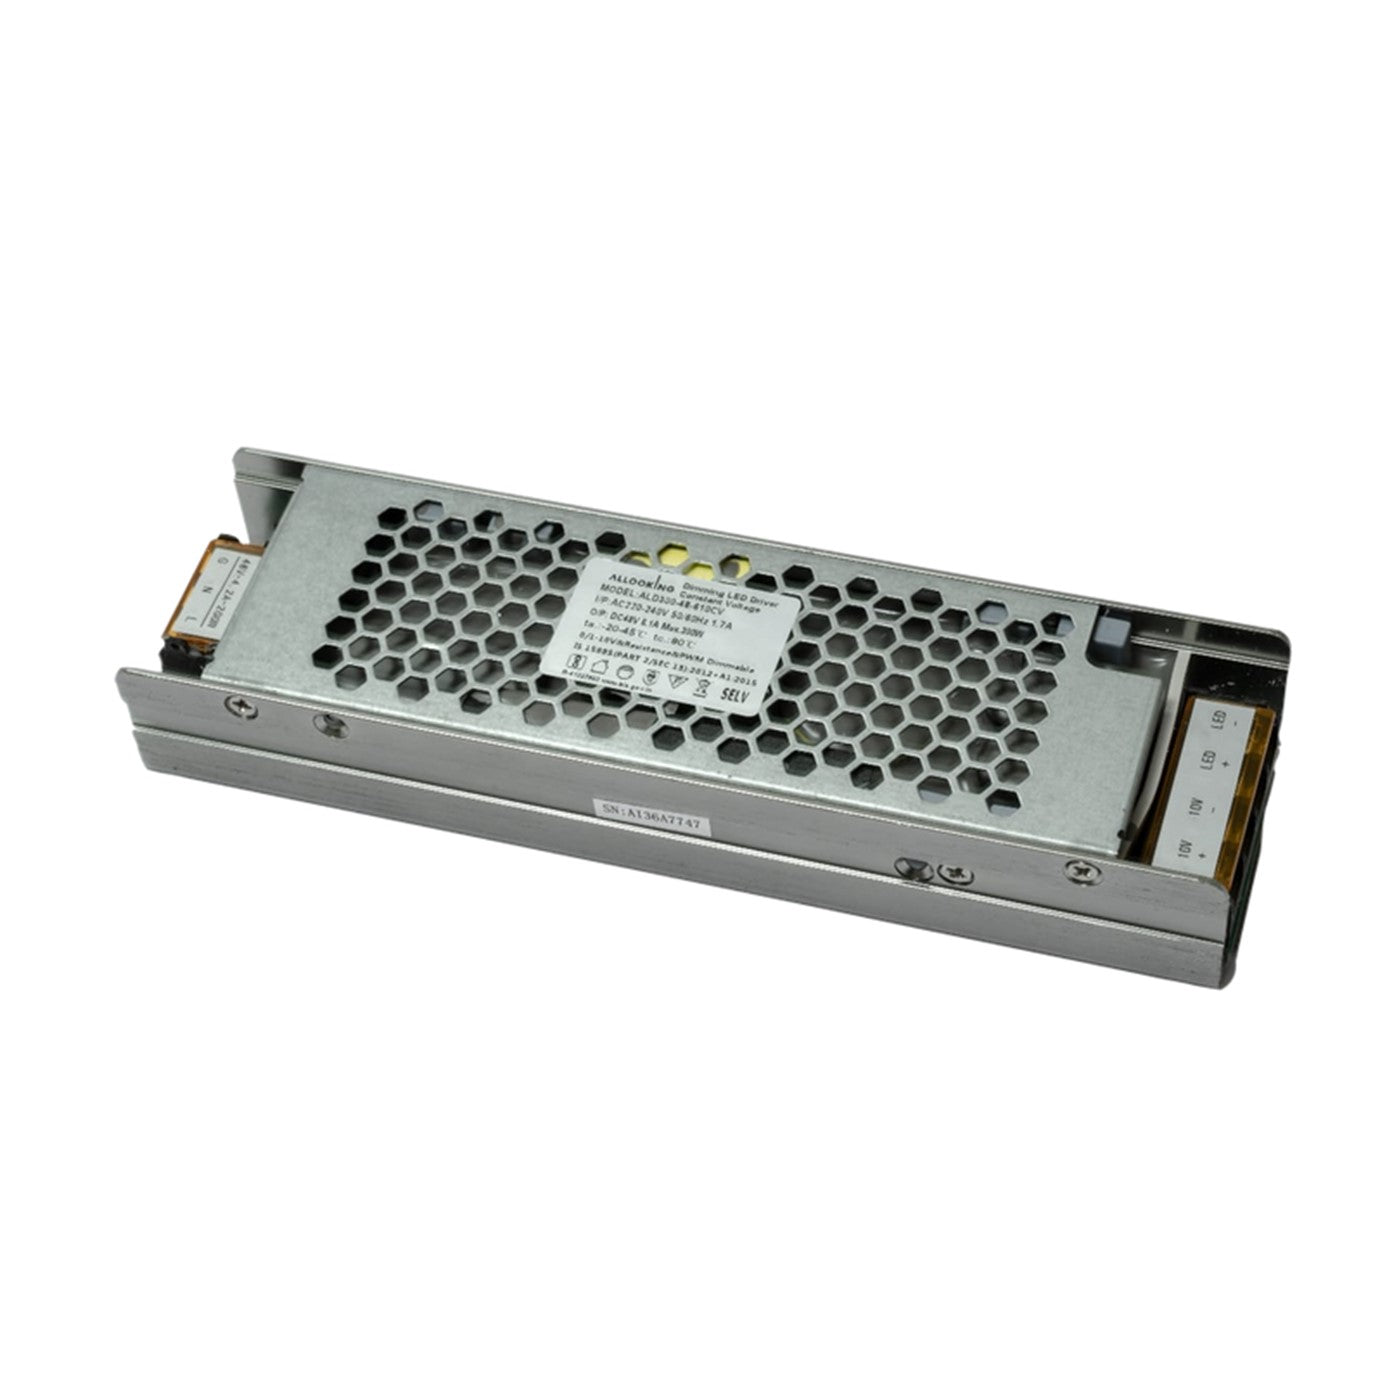 Allooking 24V 8.3A 200W Constant Voltage DALI-DT8 Dimmable Driver